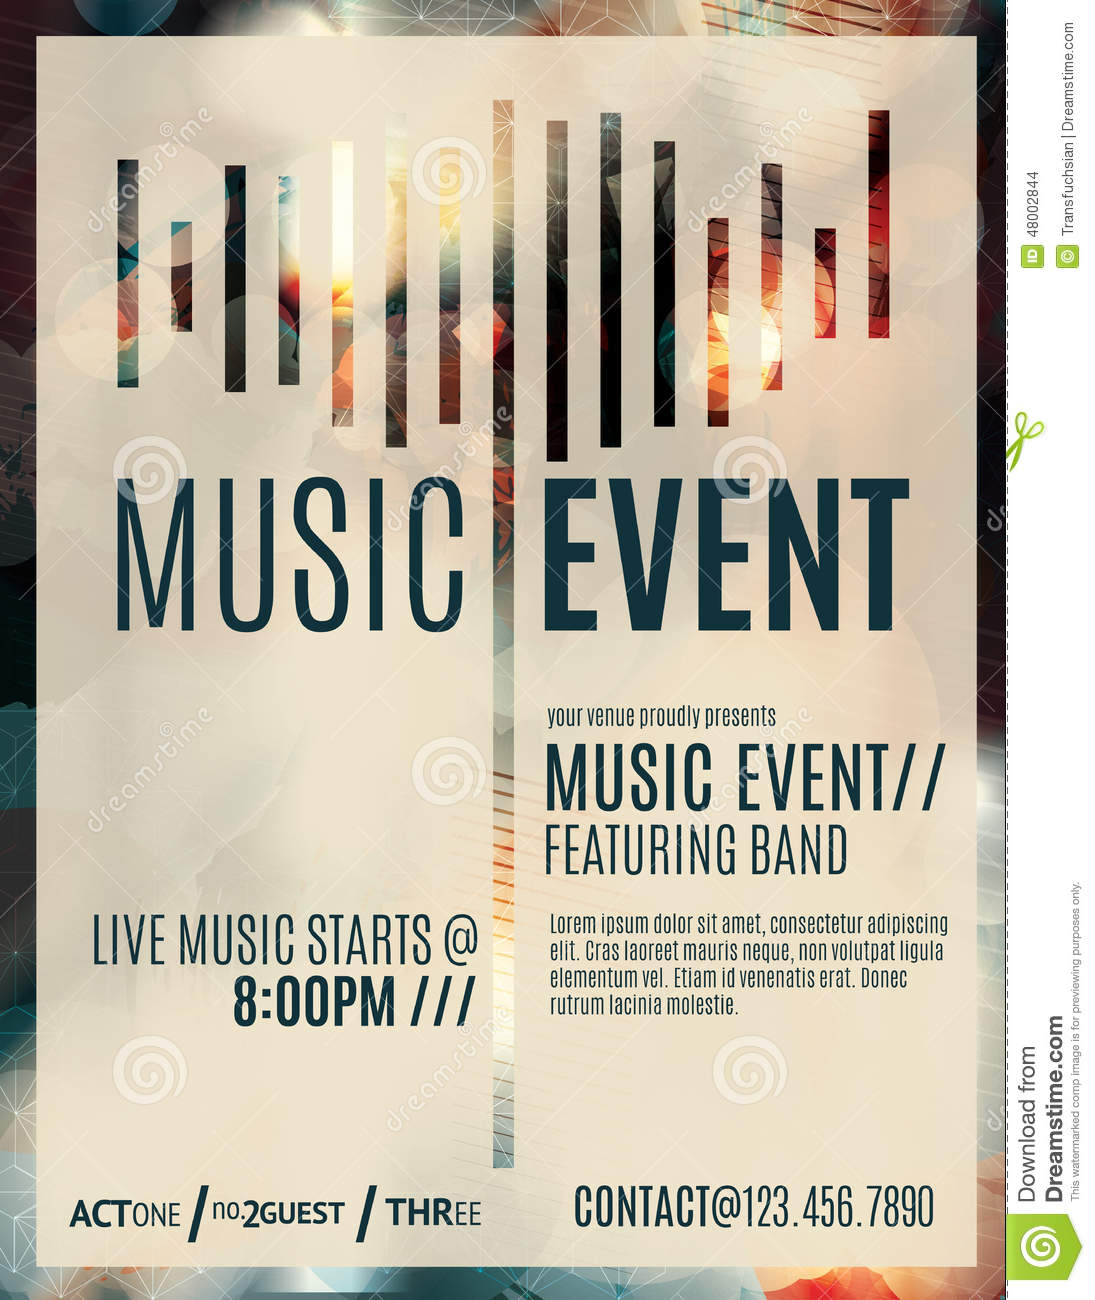 Music event flyer template stock vector Throughout Live Music Flyer Template